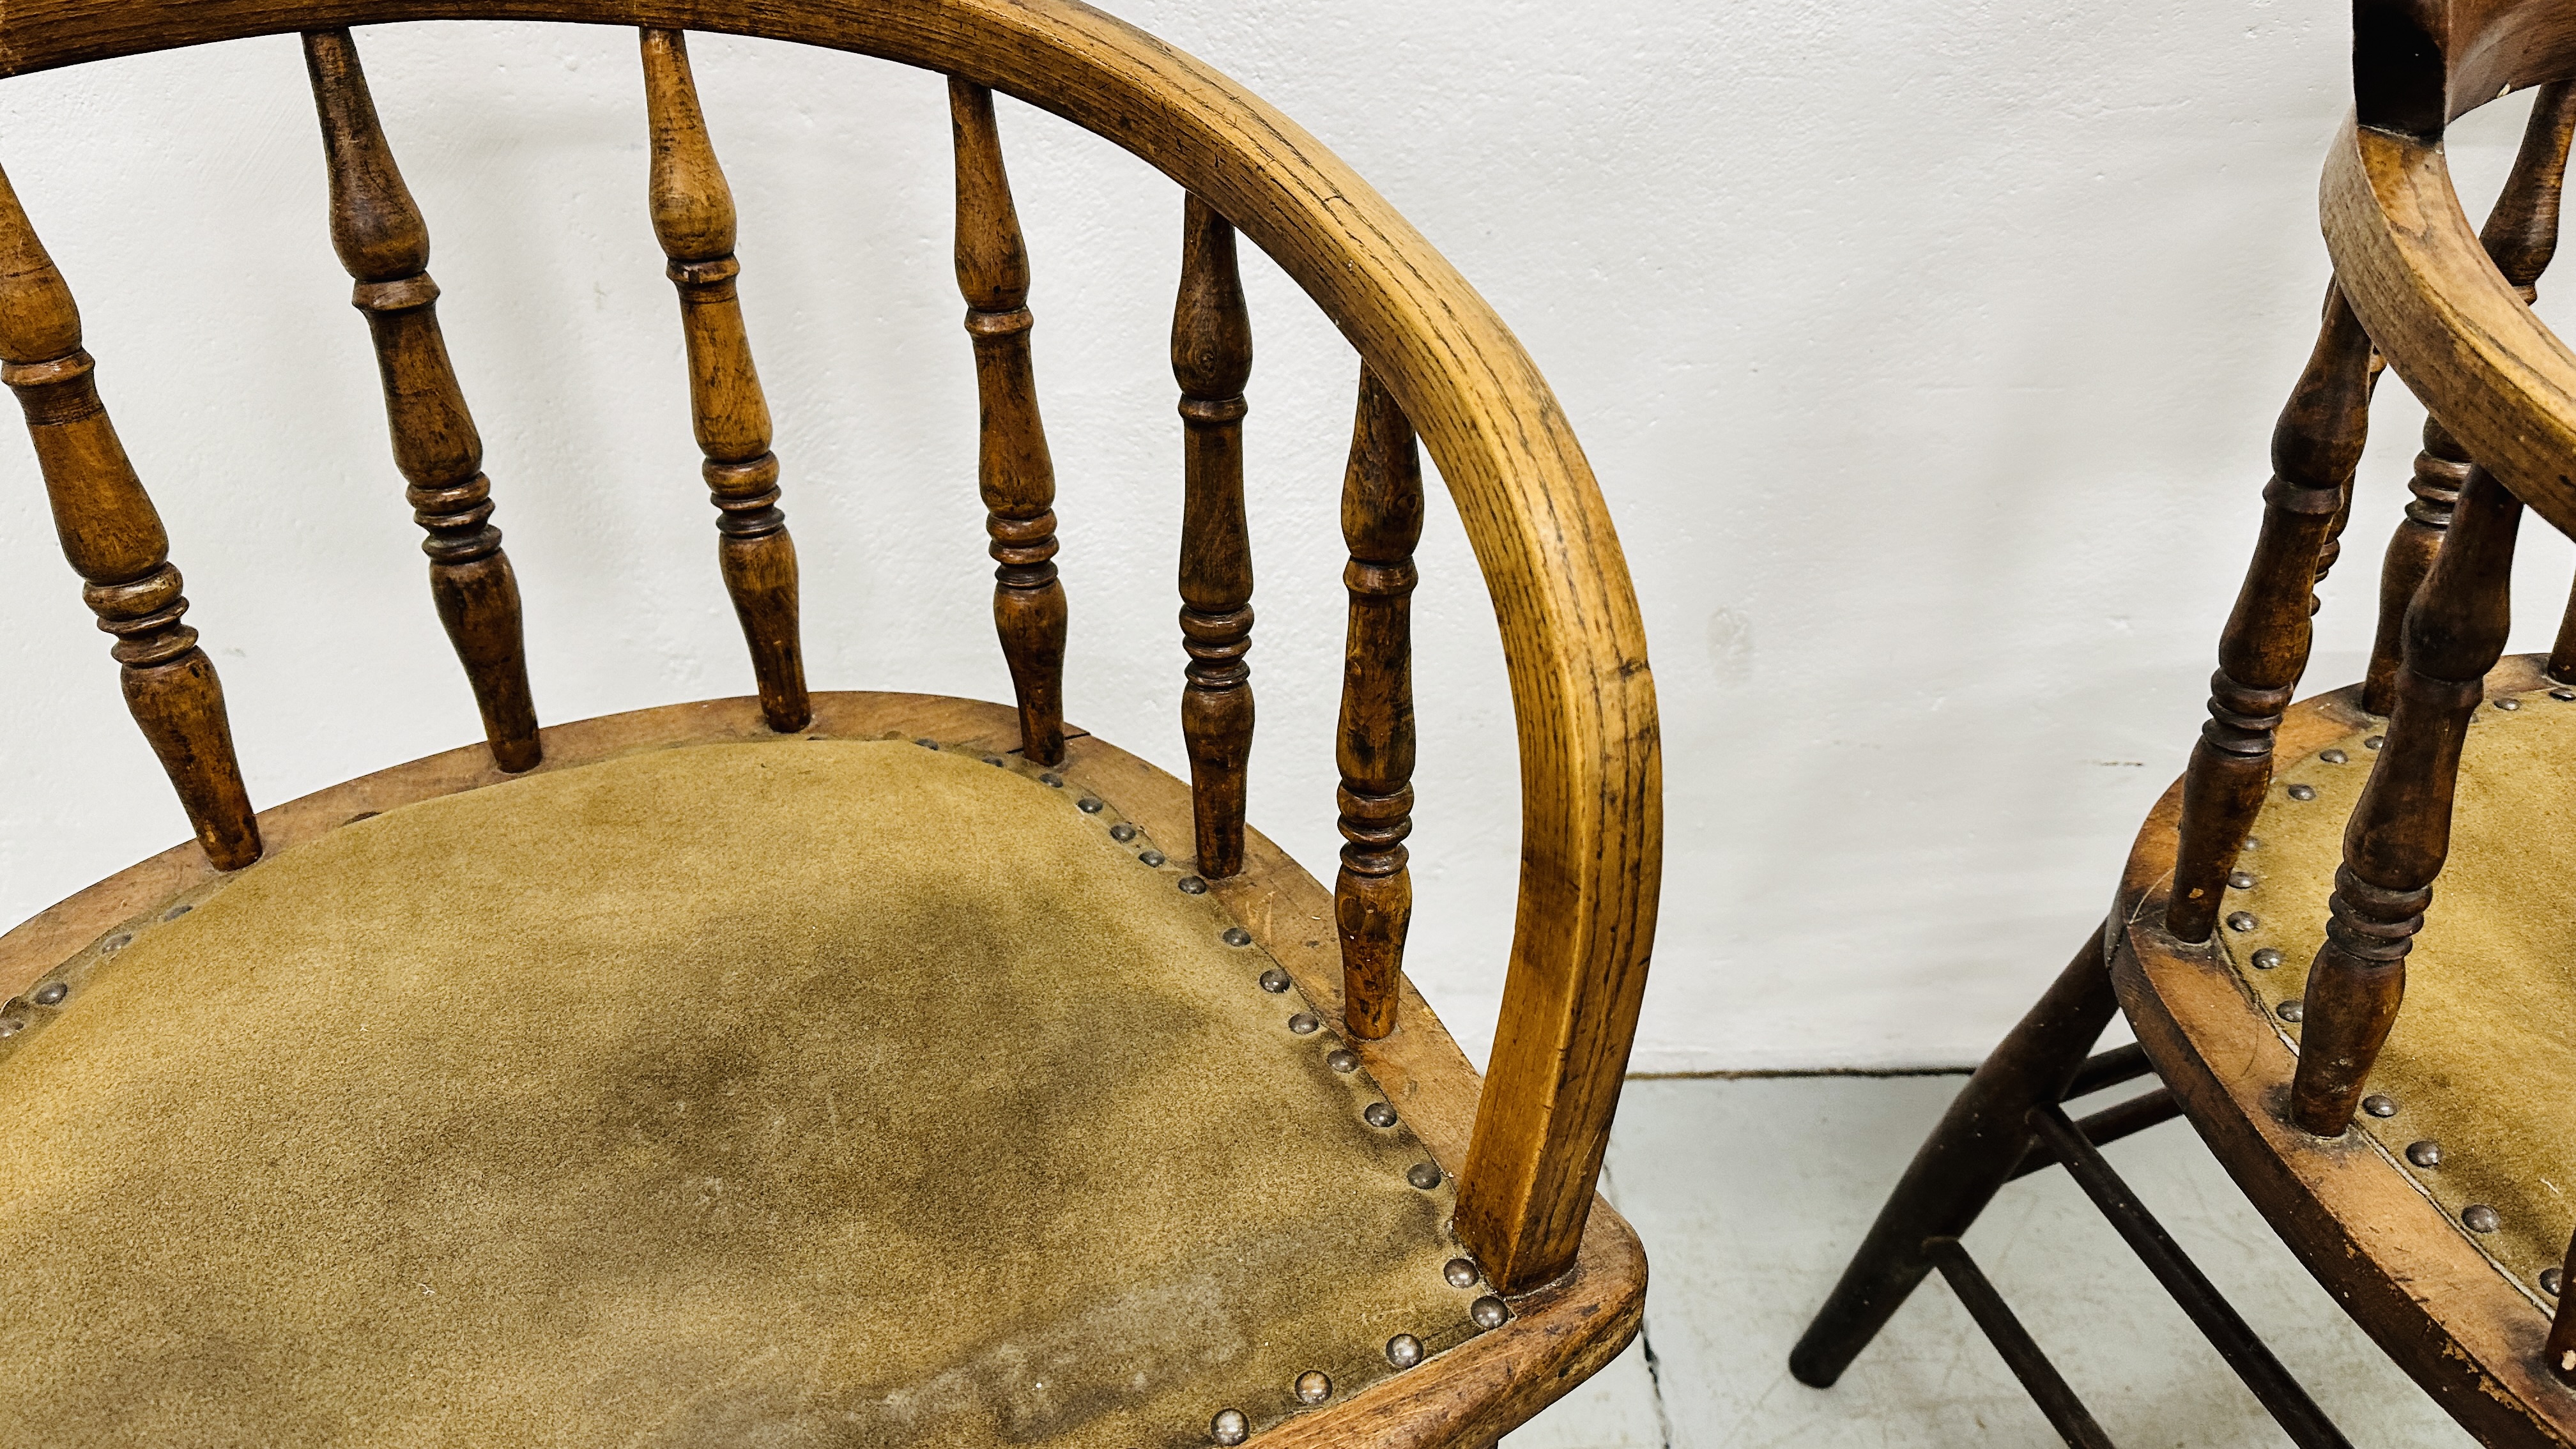 A PAIR OF ANTIQUE SOLID OAK CHAIRS HAVING GREEN LEATHERED SEATS. - Image 16 of 18